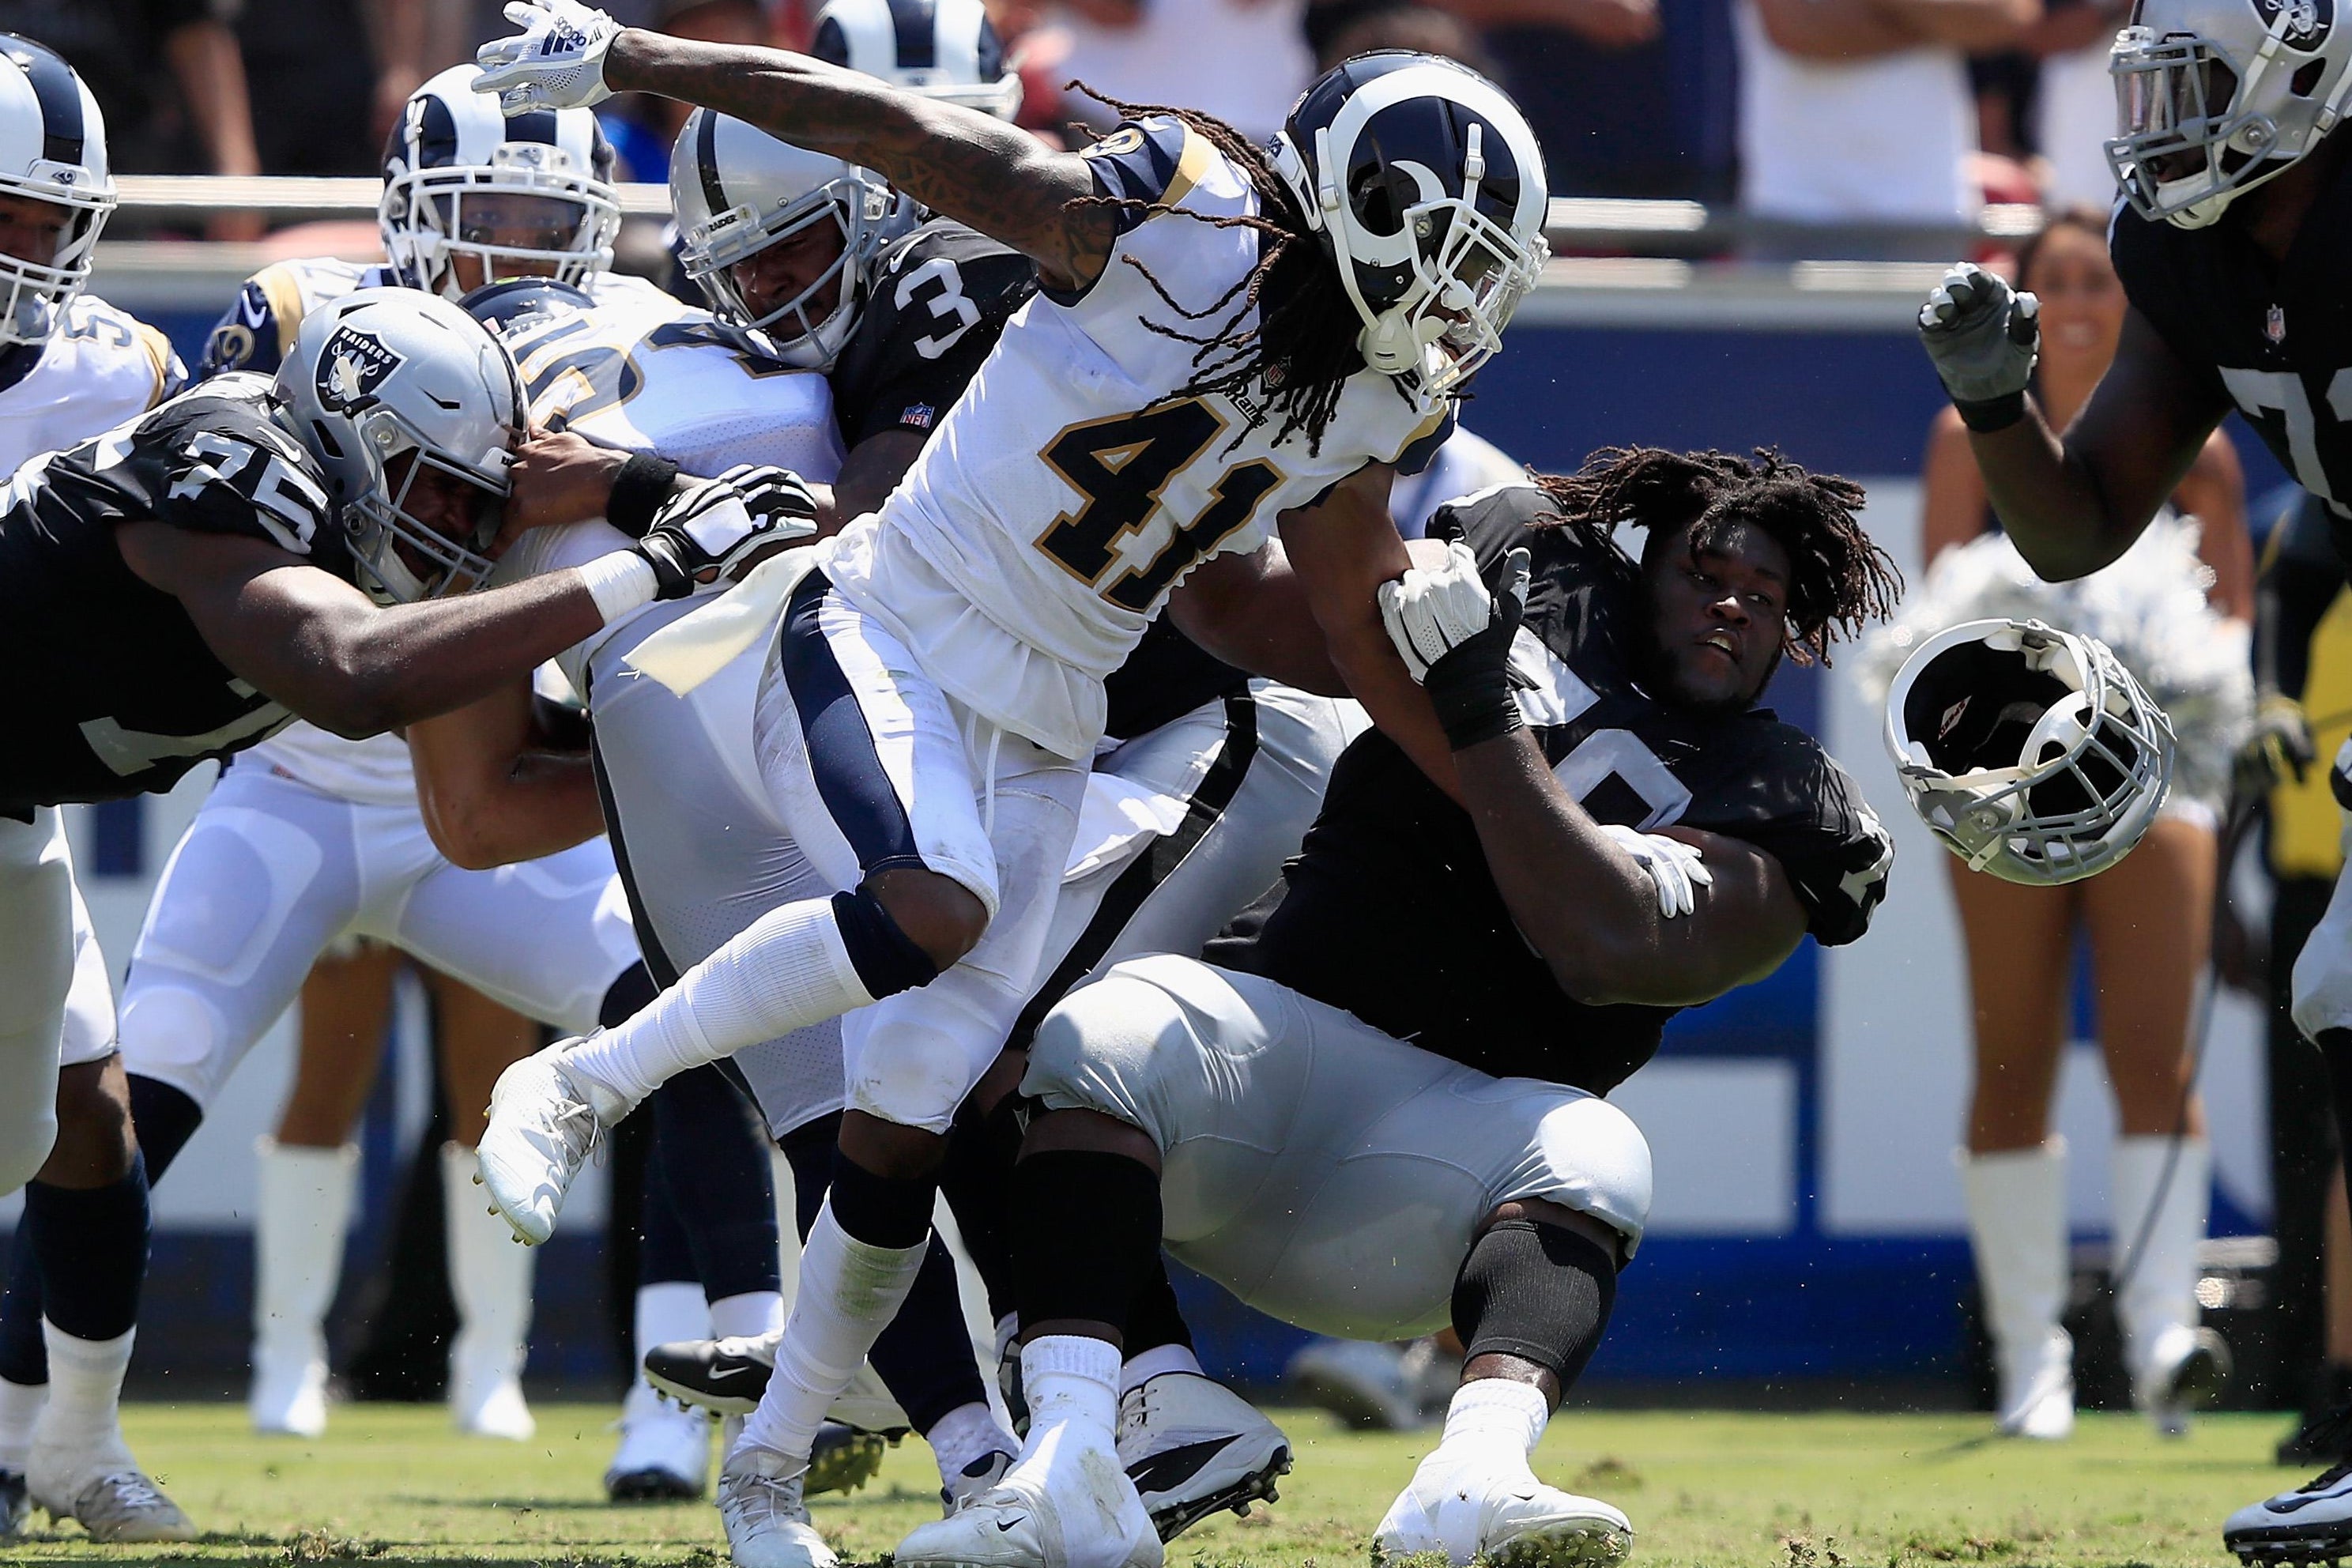 LOS ANGELES, CA - AUGUST 18:  Denver Kirkland #79 of the Oakland Raiders has his helmet knocked offsides by Marqui Christian #41 of the Los Angeles Rams during the first half of a preseason game at Los Angeles Memorial Coliseum on August 18, 2018 in Los Angeles, California.  (Photo by Sean M. Haffey/Getty Images)